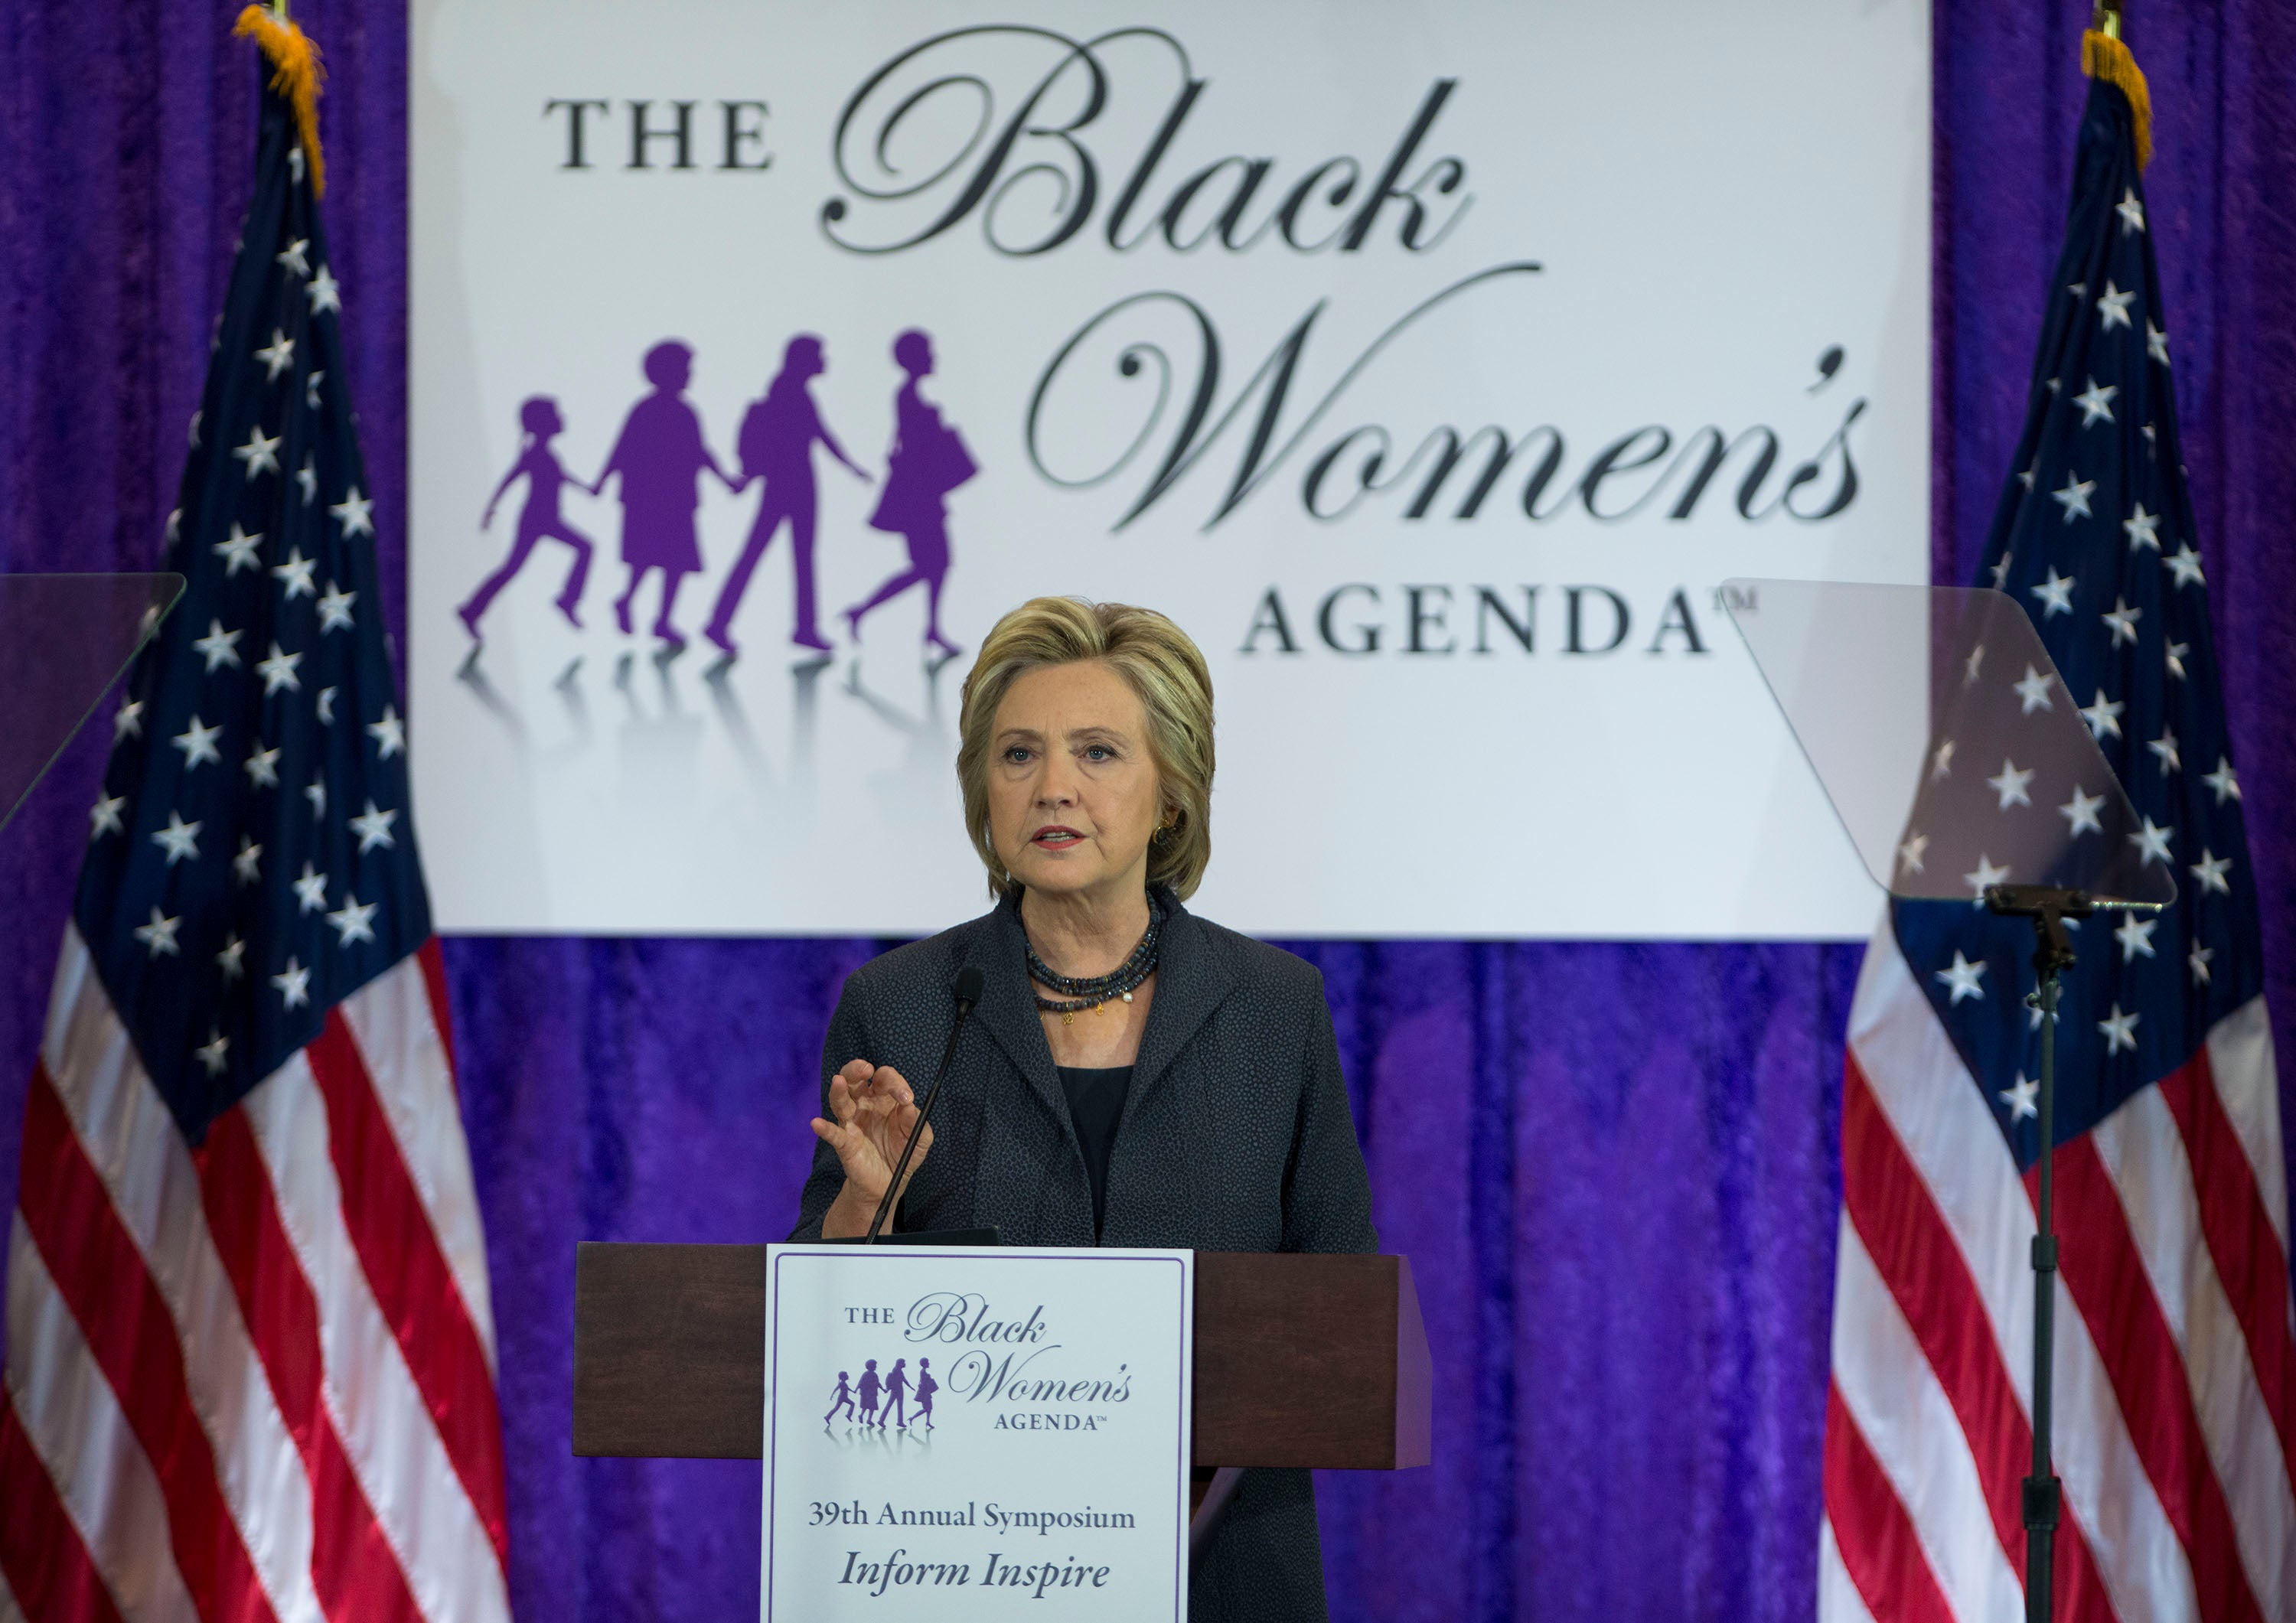 Hillary Clinton: I Would Not Be The Democratic Presidential Nominee Without Black Women
